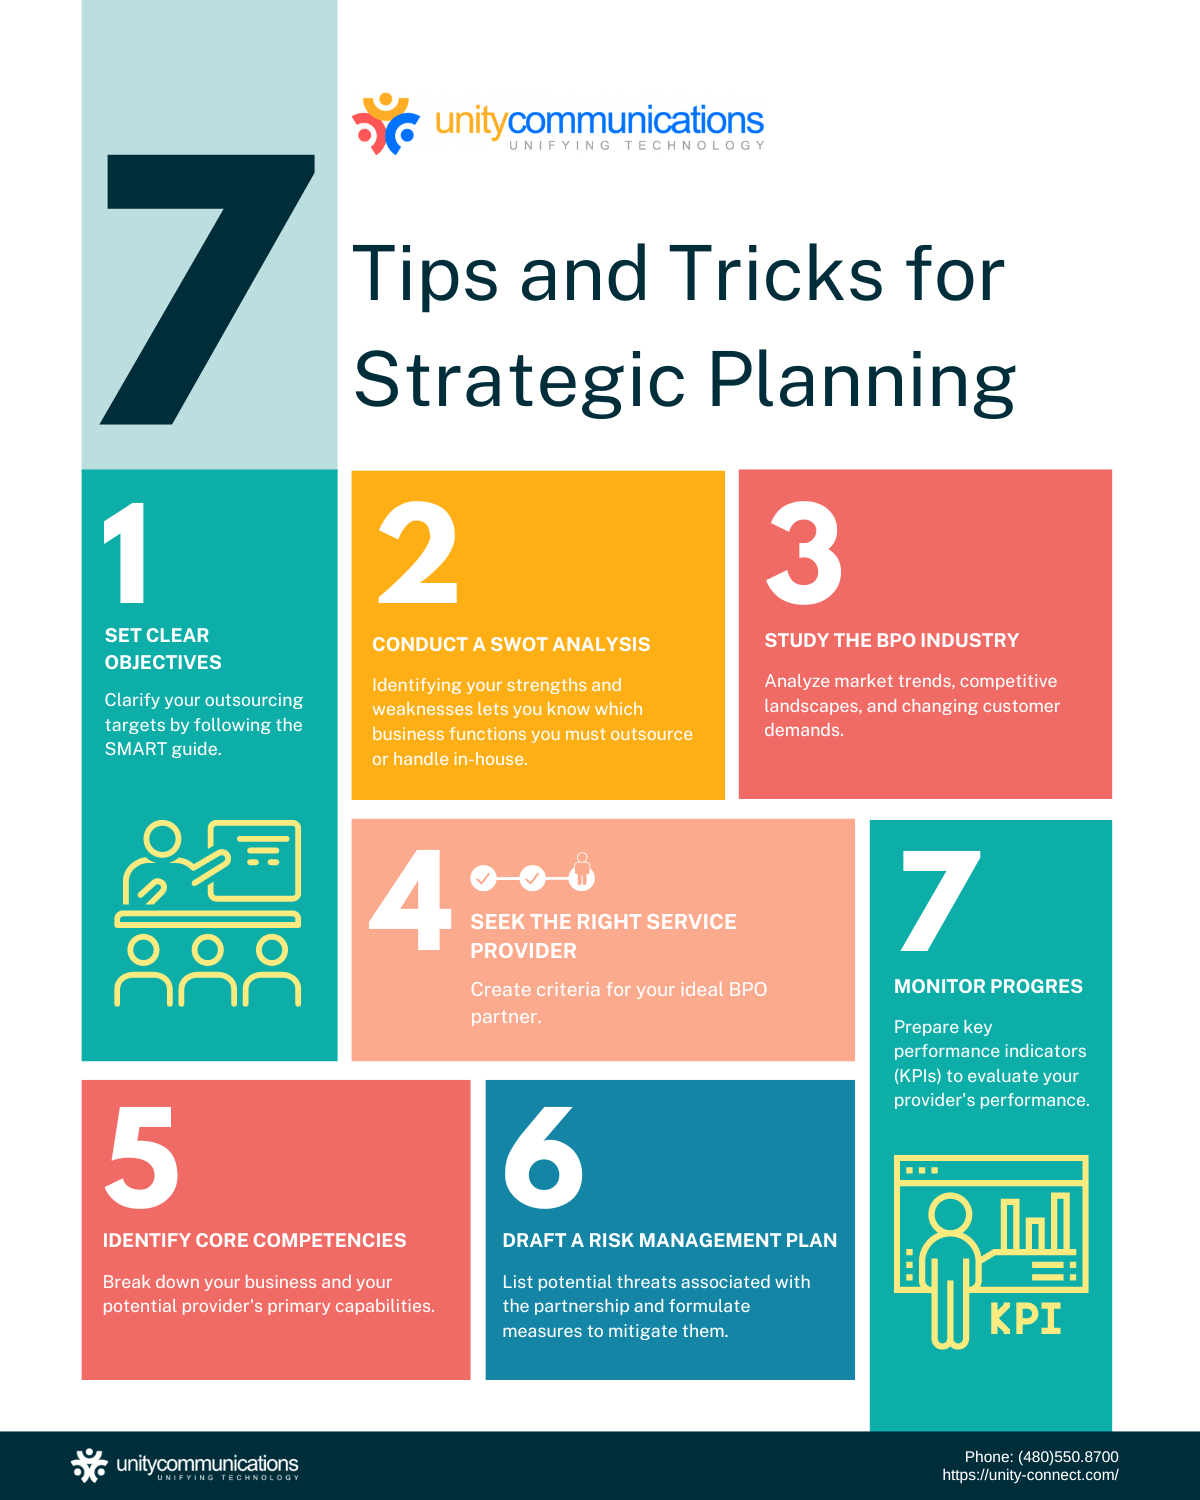 Seven Actionable Tips and Tricks for Strategic Planning